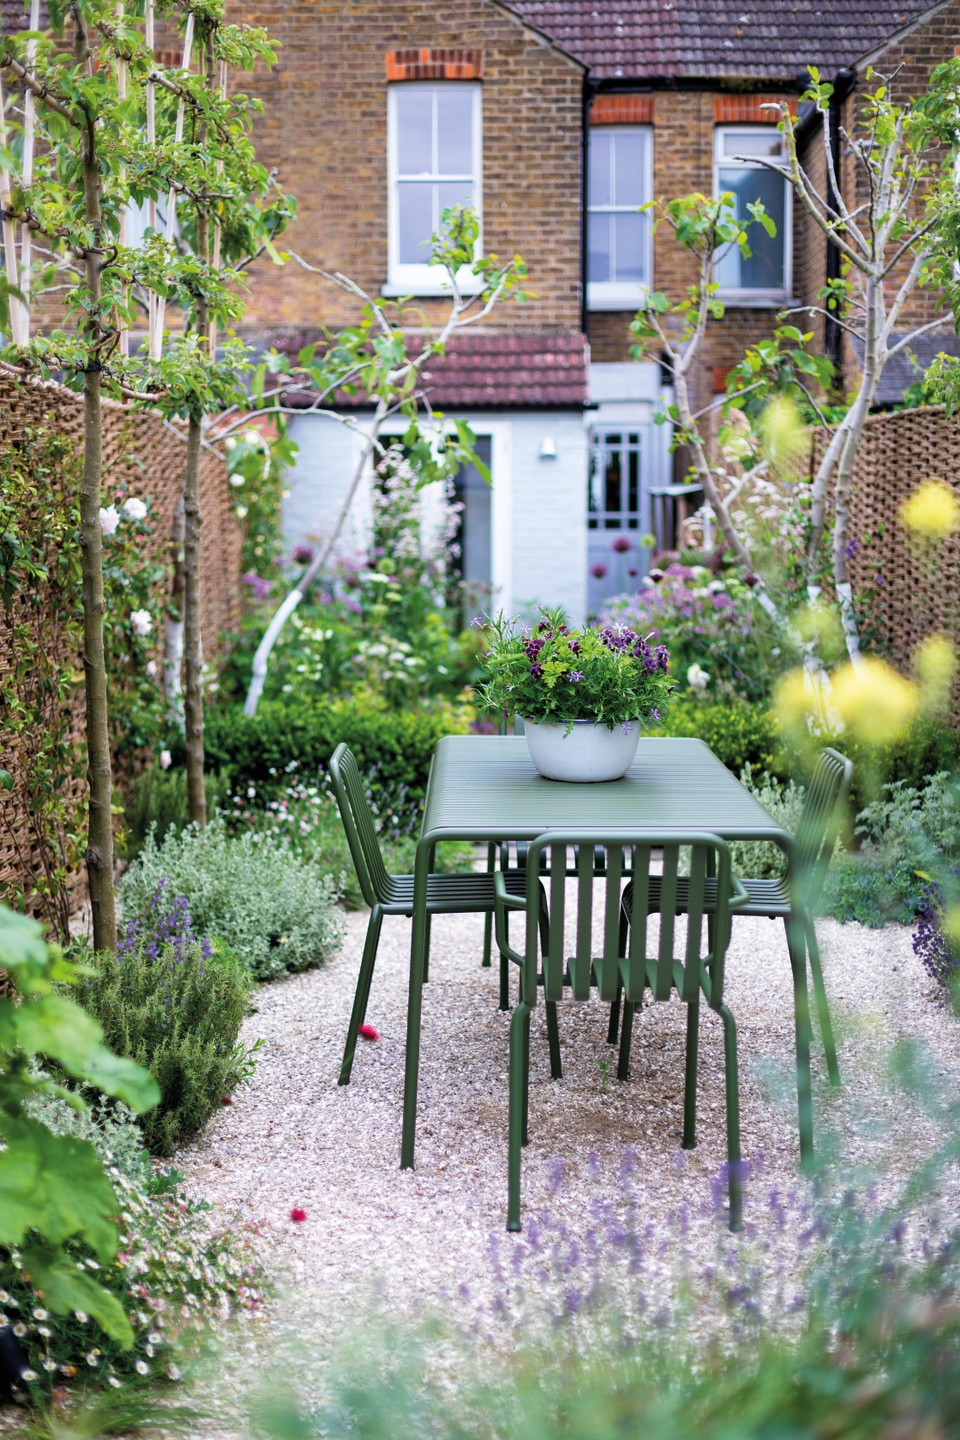 How To Make The Most Of A Small Garden